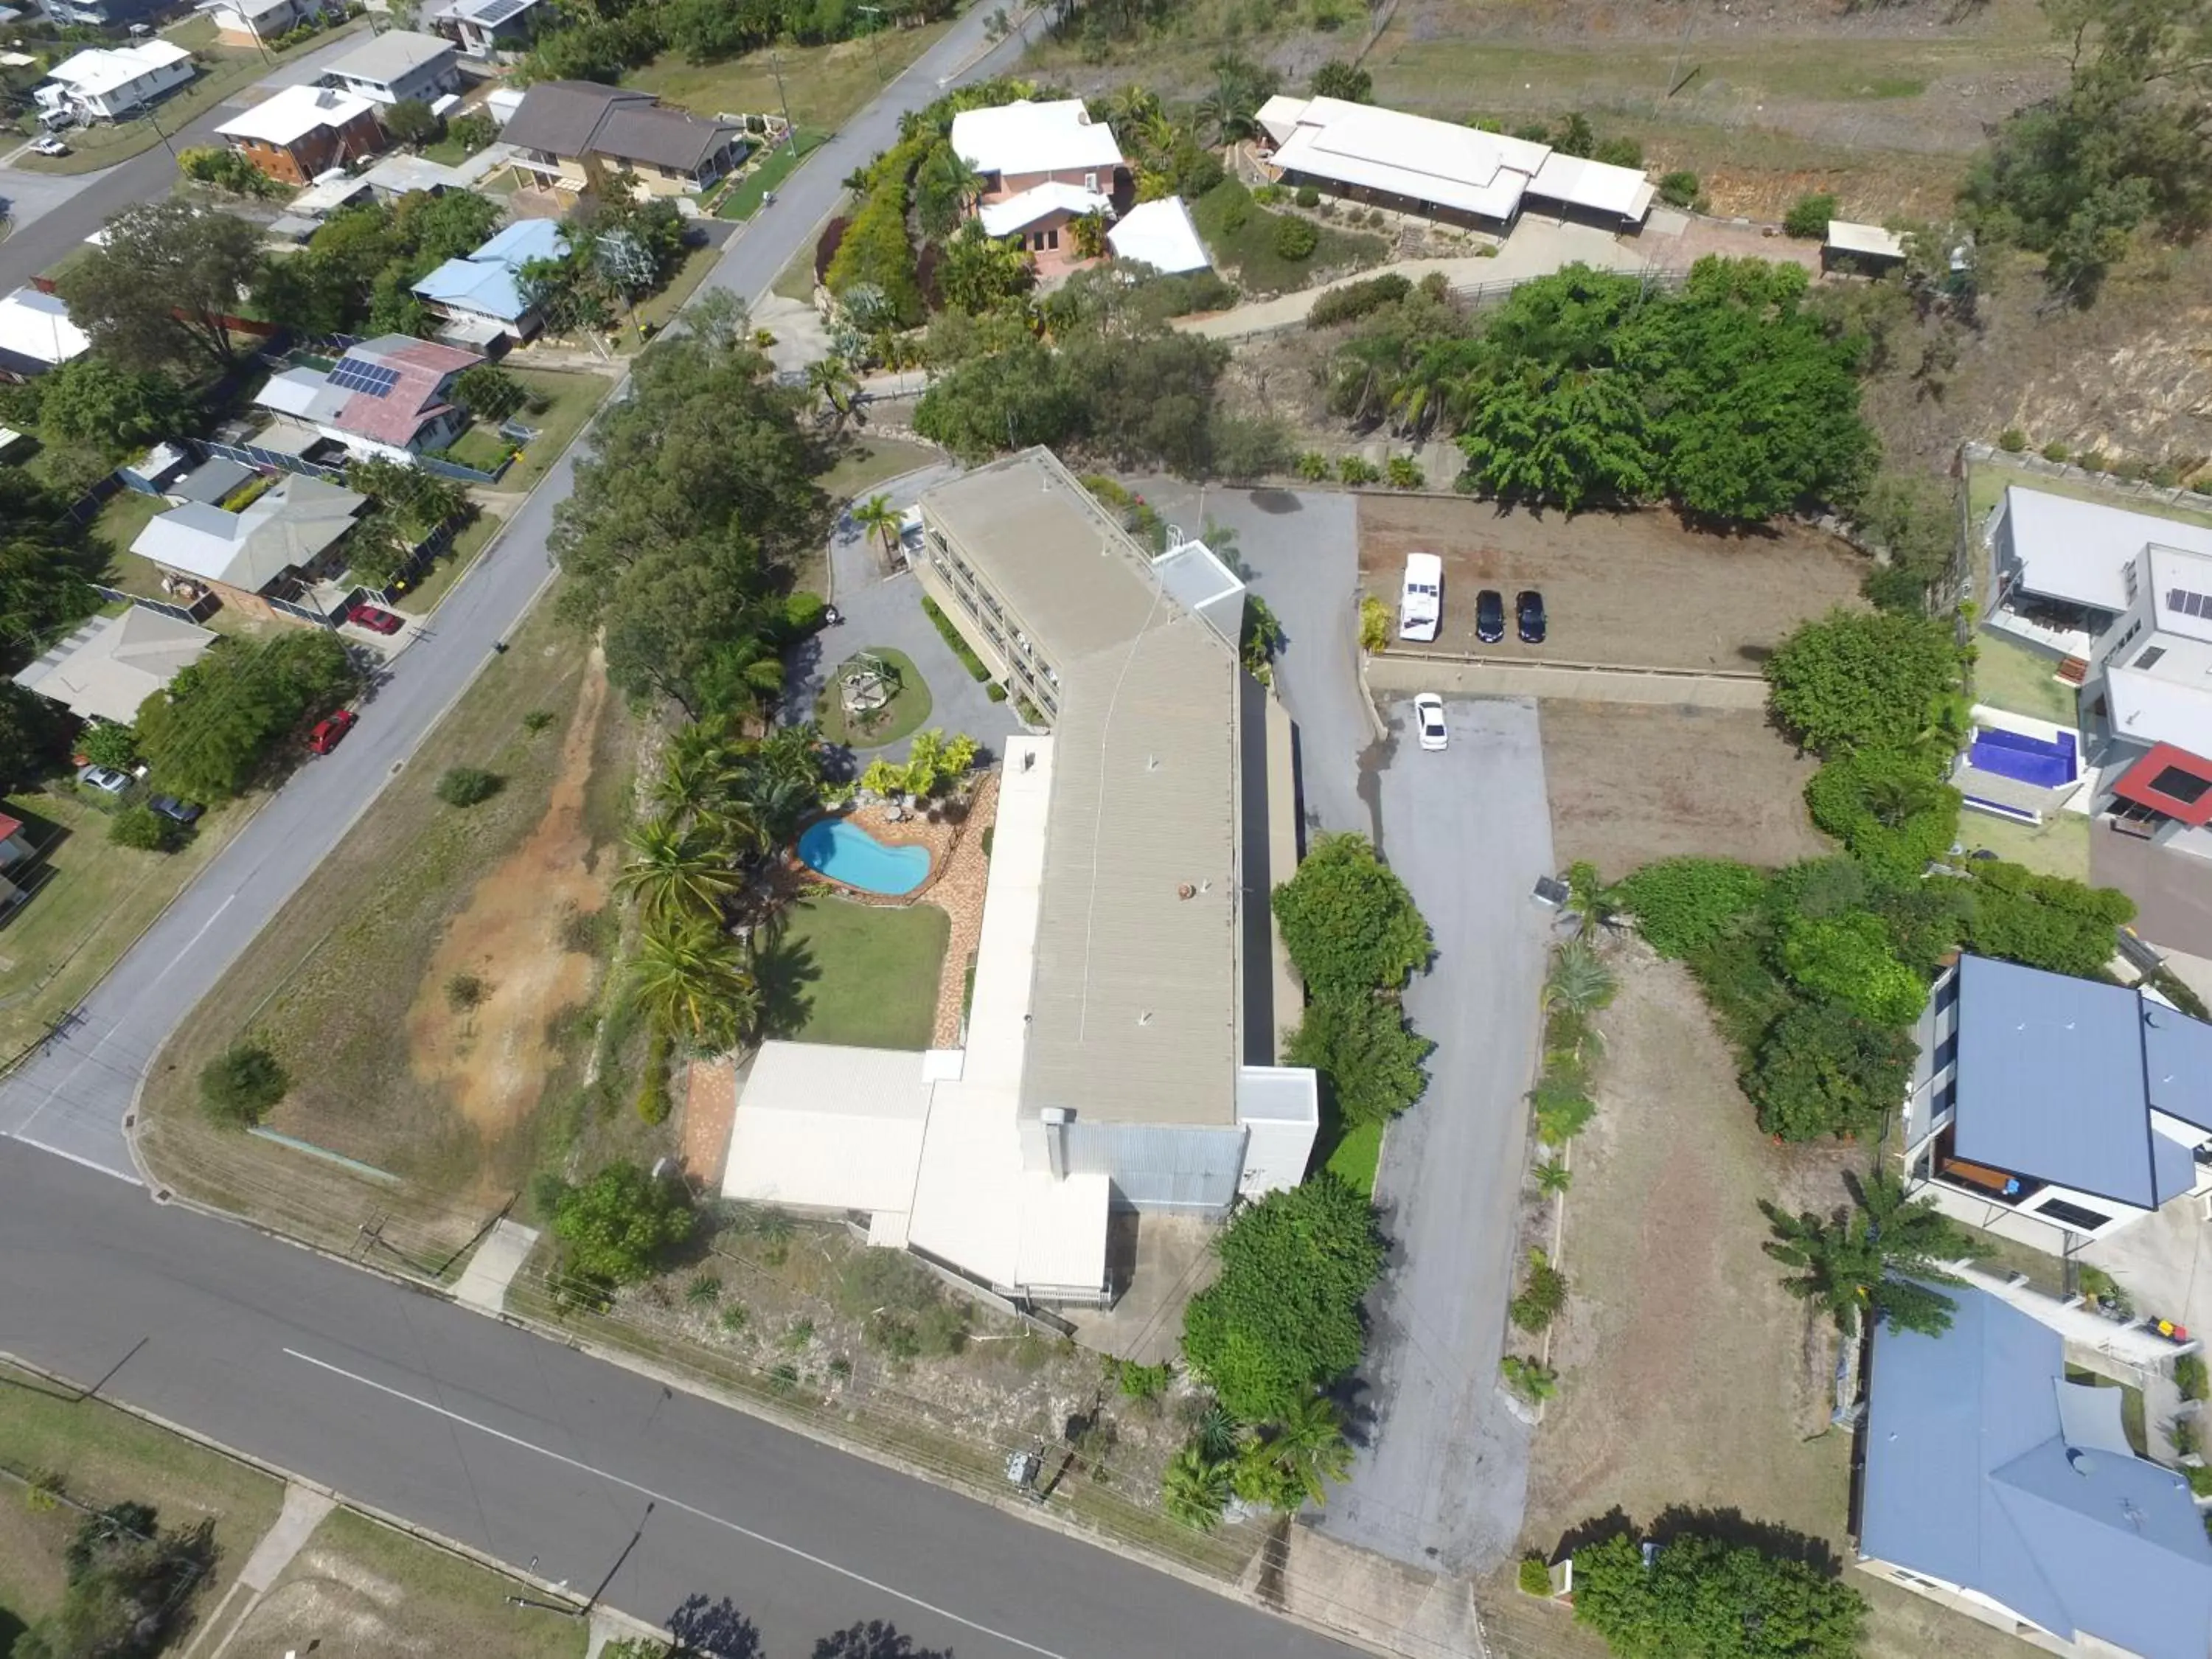 Property building, Bird's-eye View in Camelot Motel